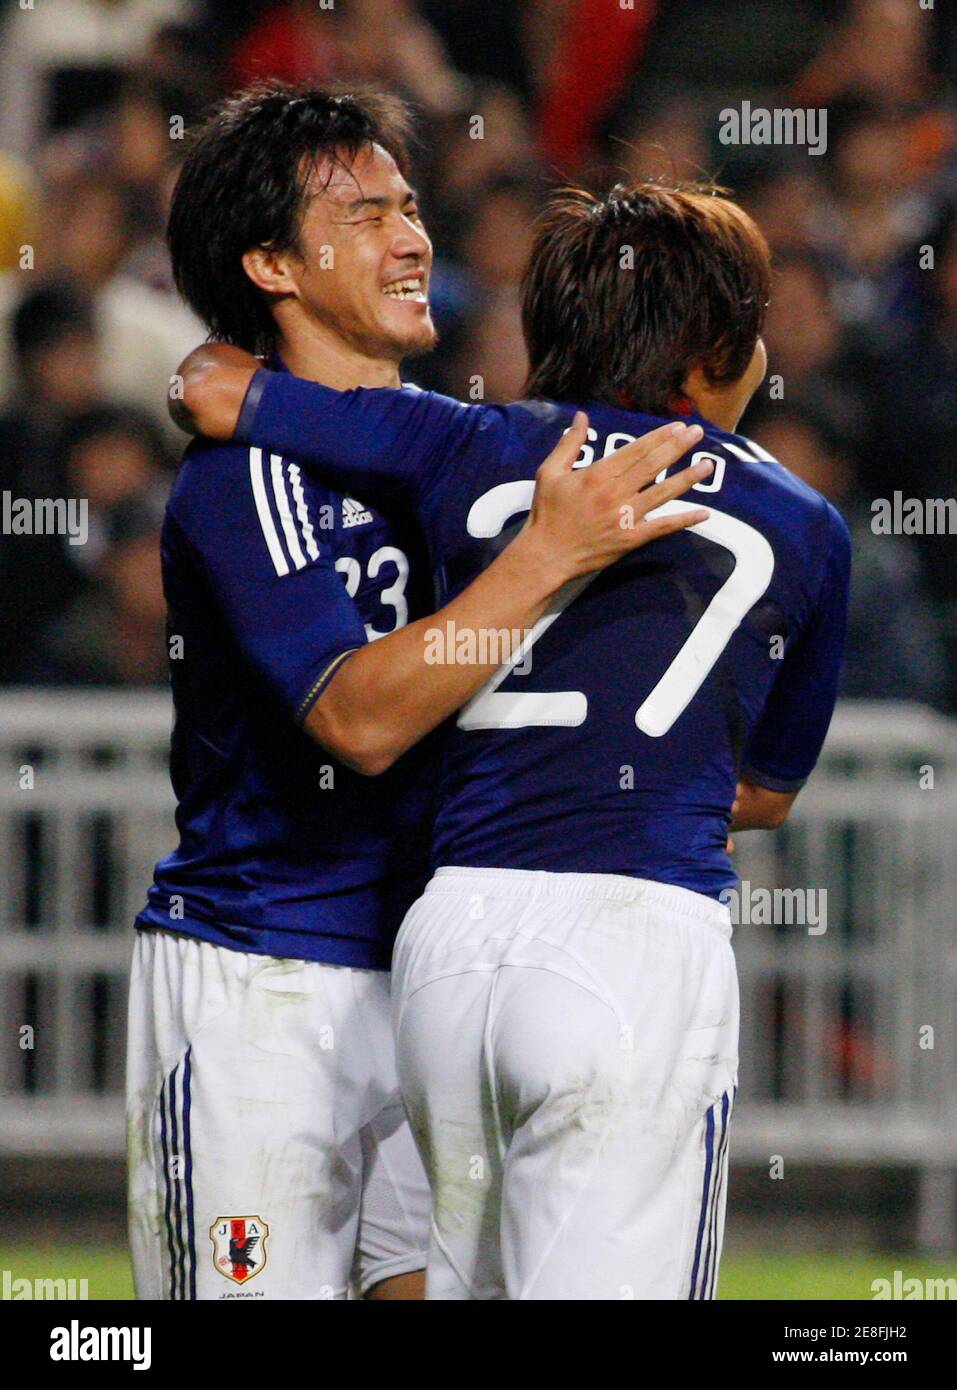 Shinji Okazaki and Hisato Sato (R) of Japan celebrate after Sato scored a goal against Hong Kong during the second half of their AFC Asian Cup 2011 qualifying match in Hong Kong November 18, 2009.  REUTERS/Tyrone Siu    (CHINA SPORT SOCCER) Stock Photo